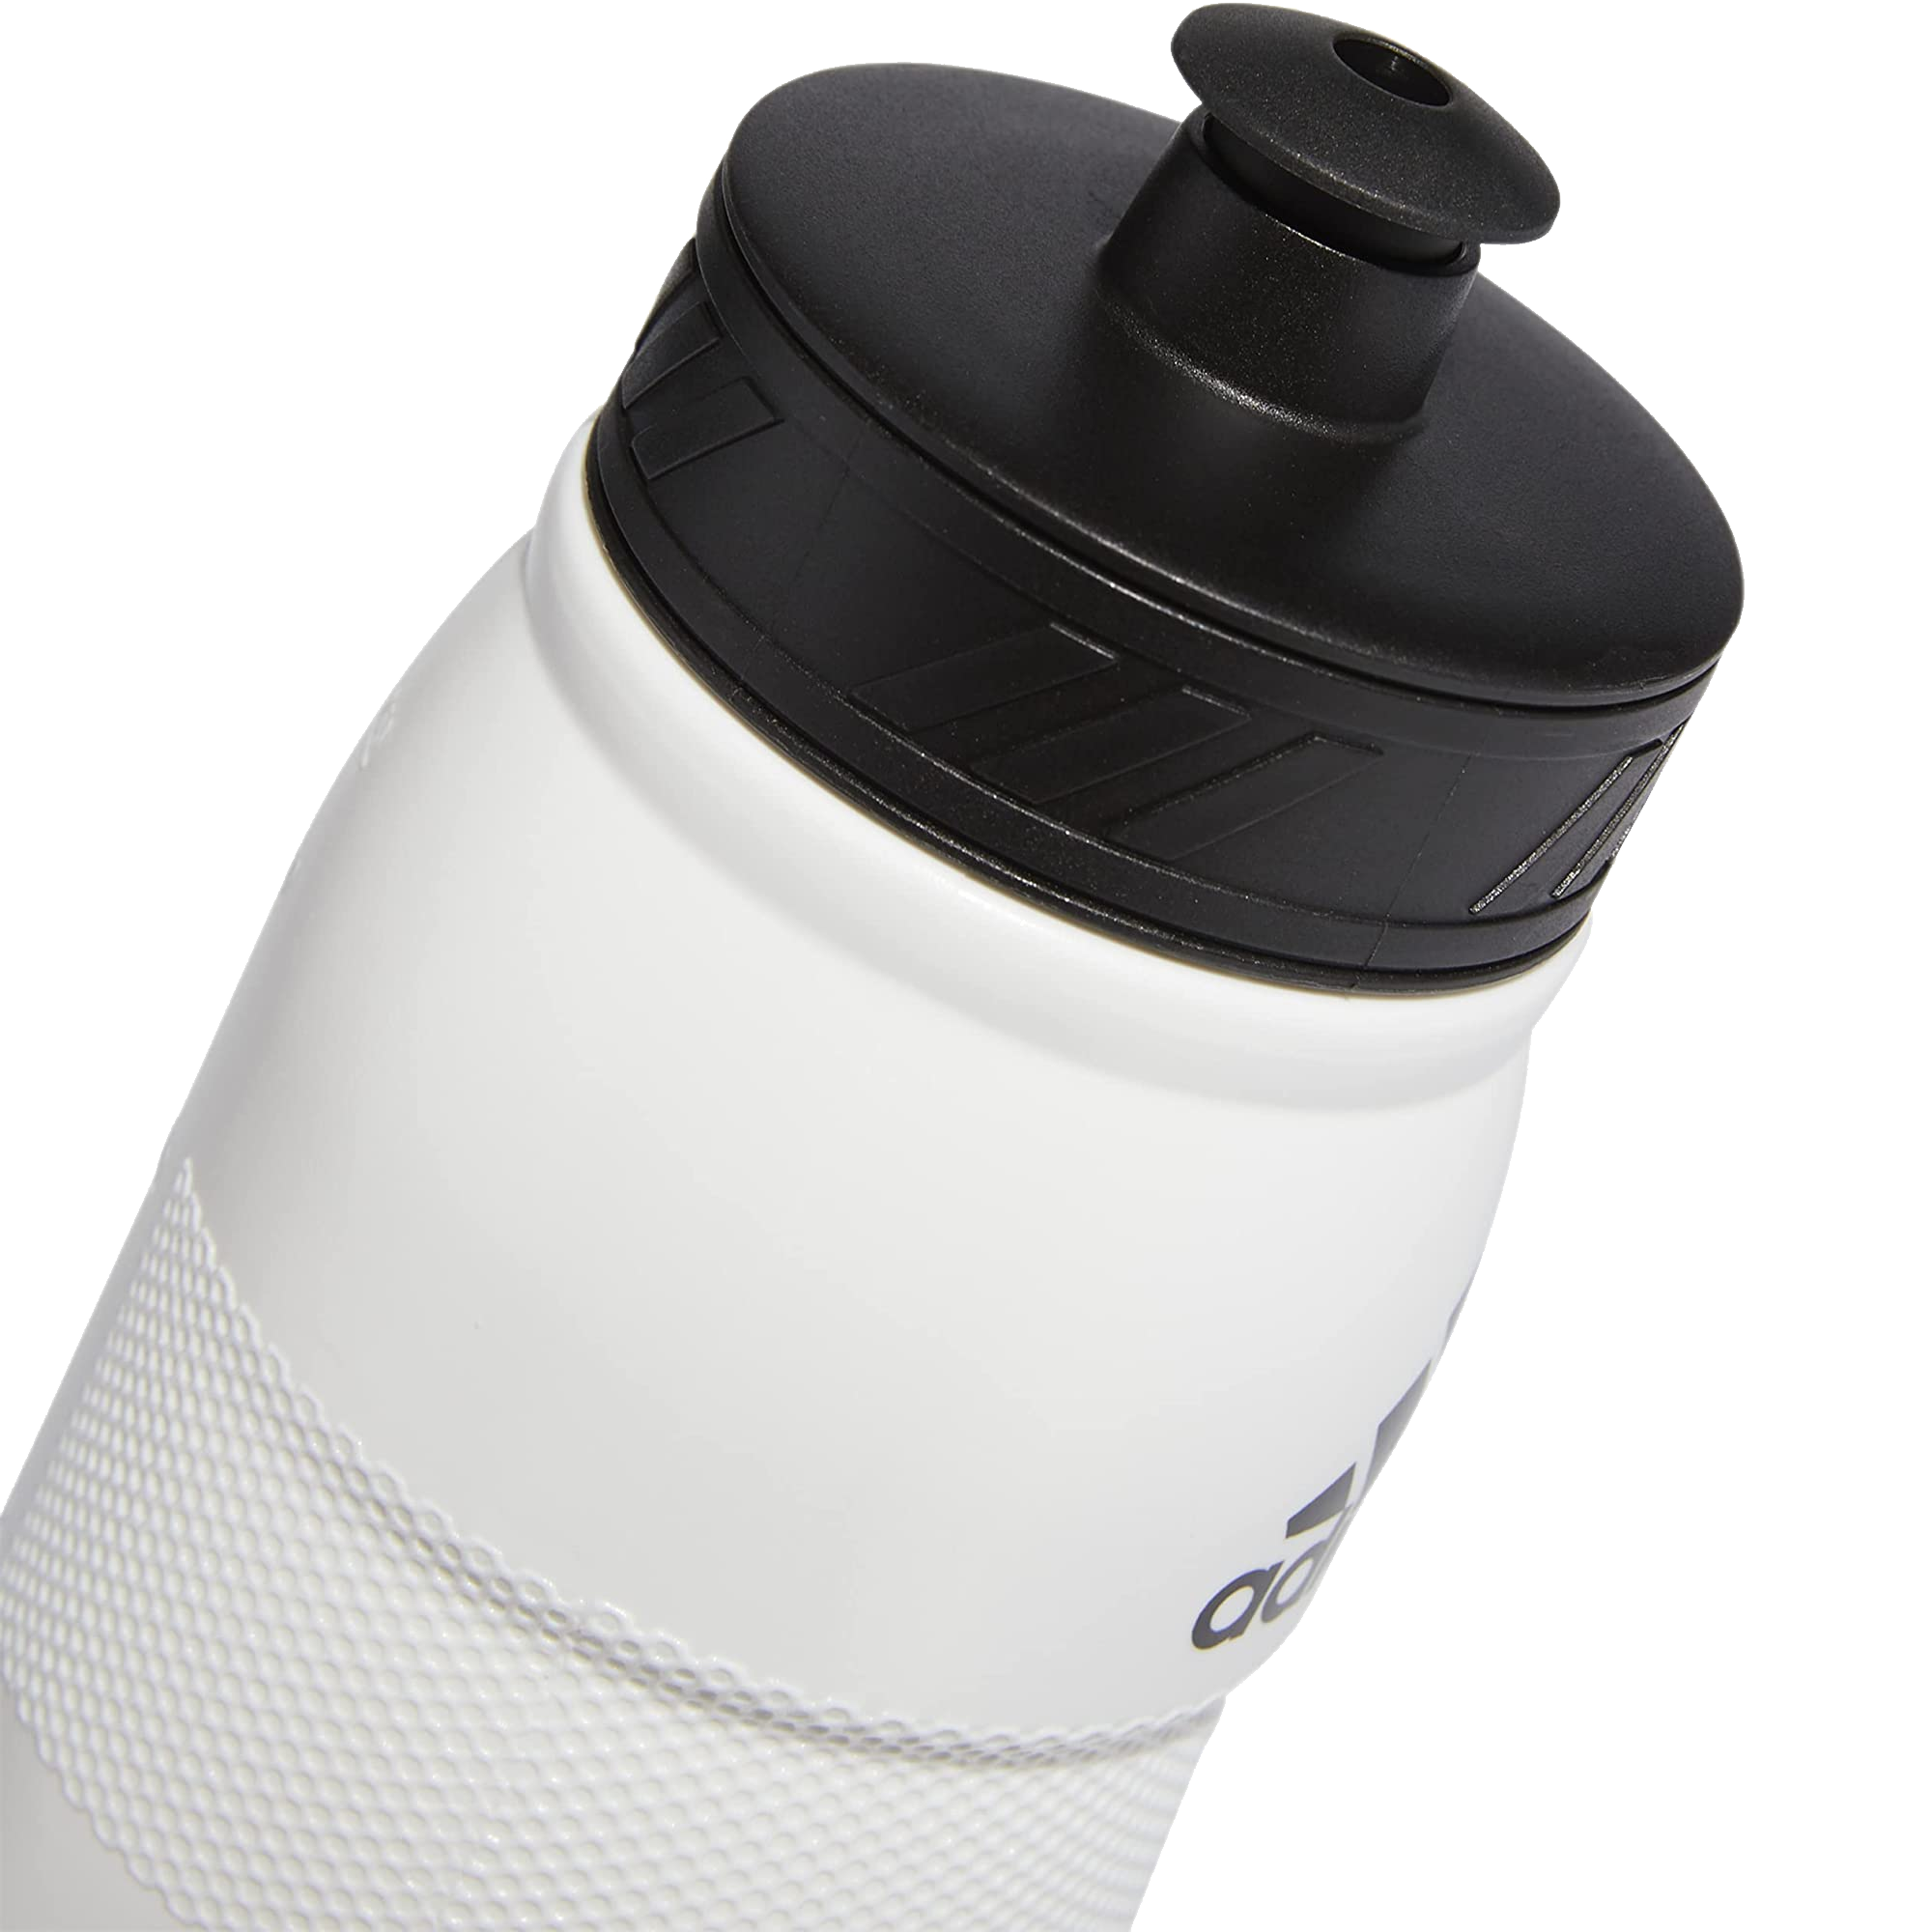 White water bottle Adidas  Online Agency to Buy and Send Food